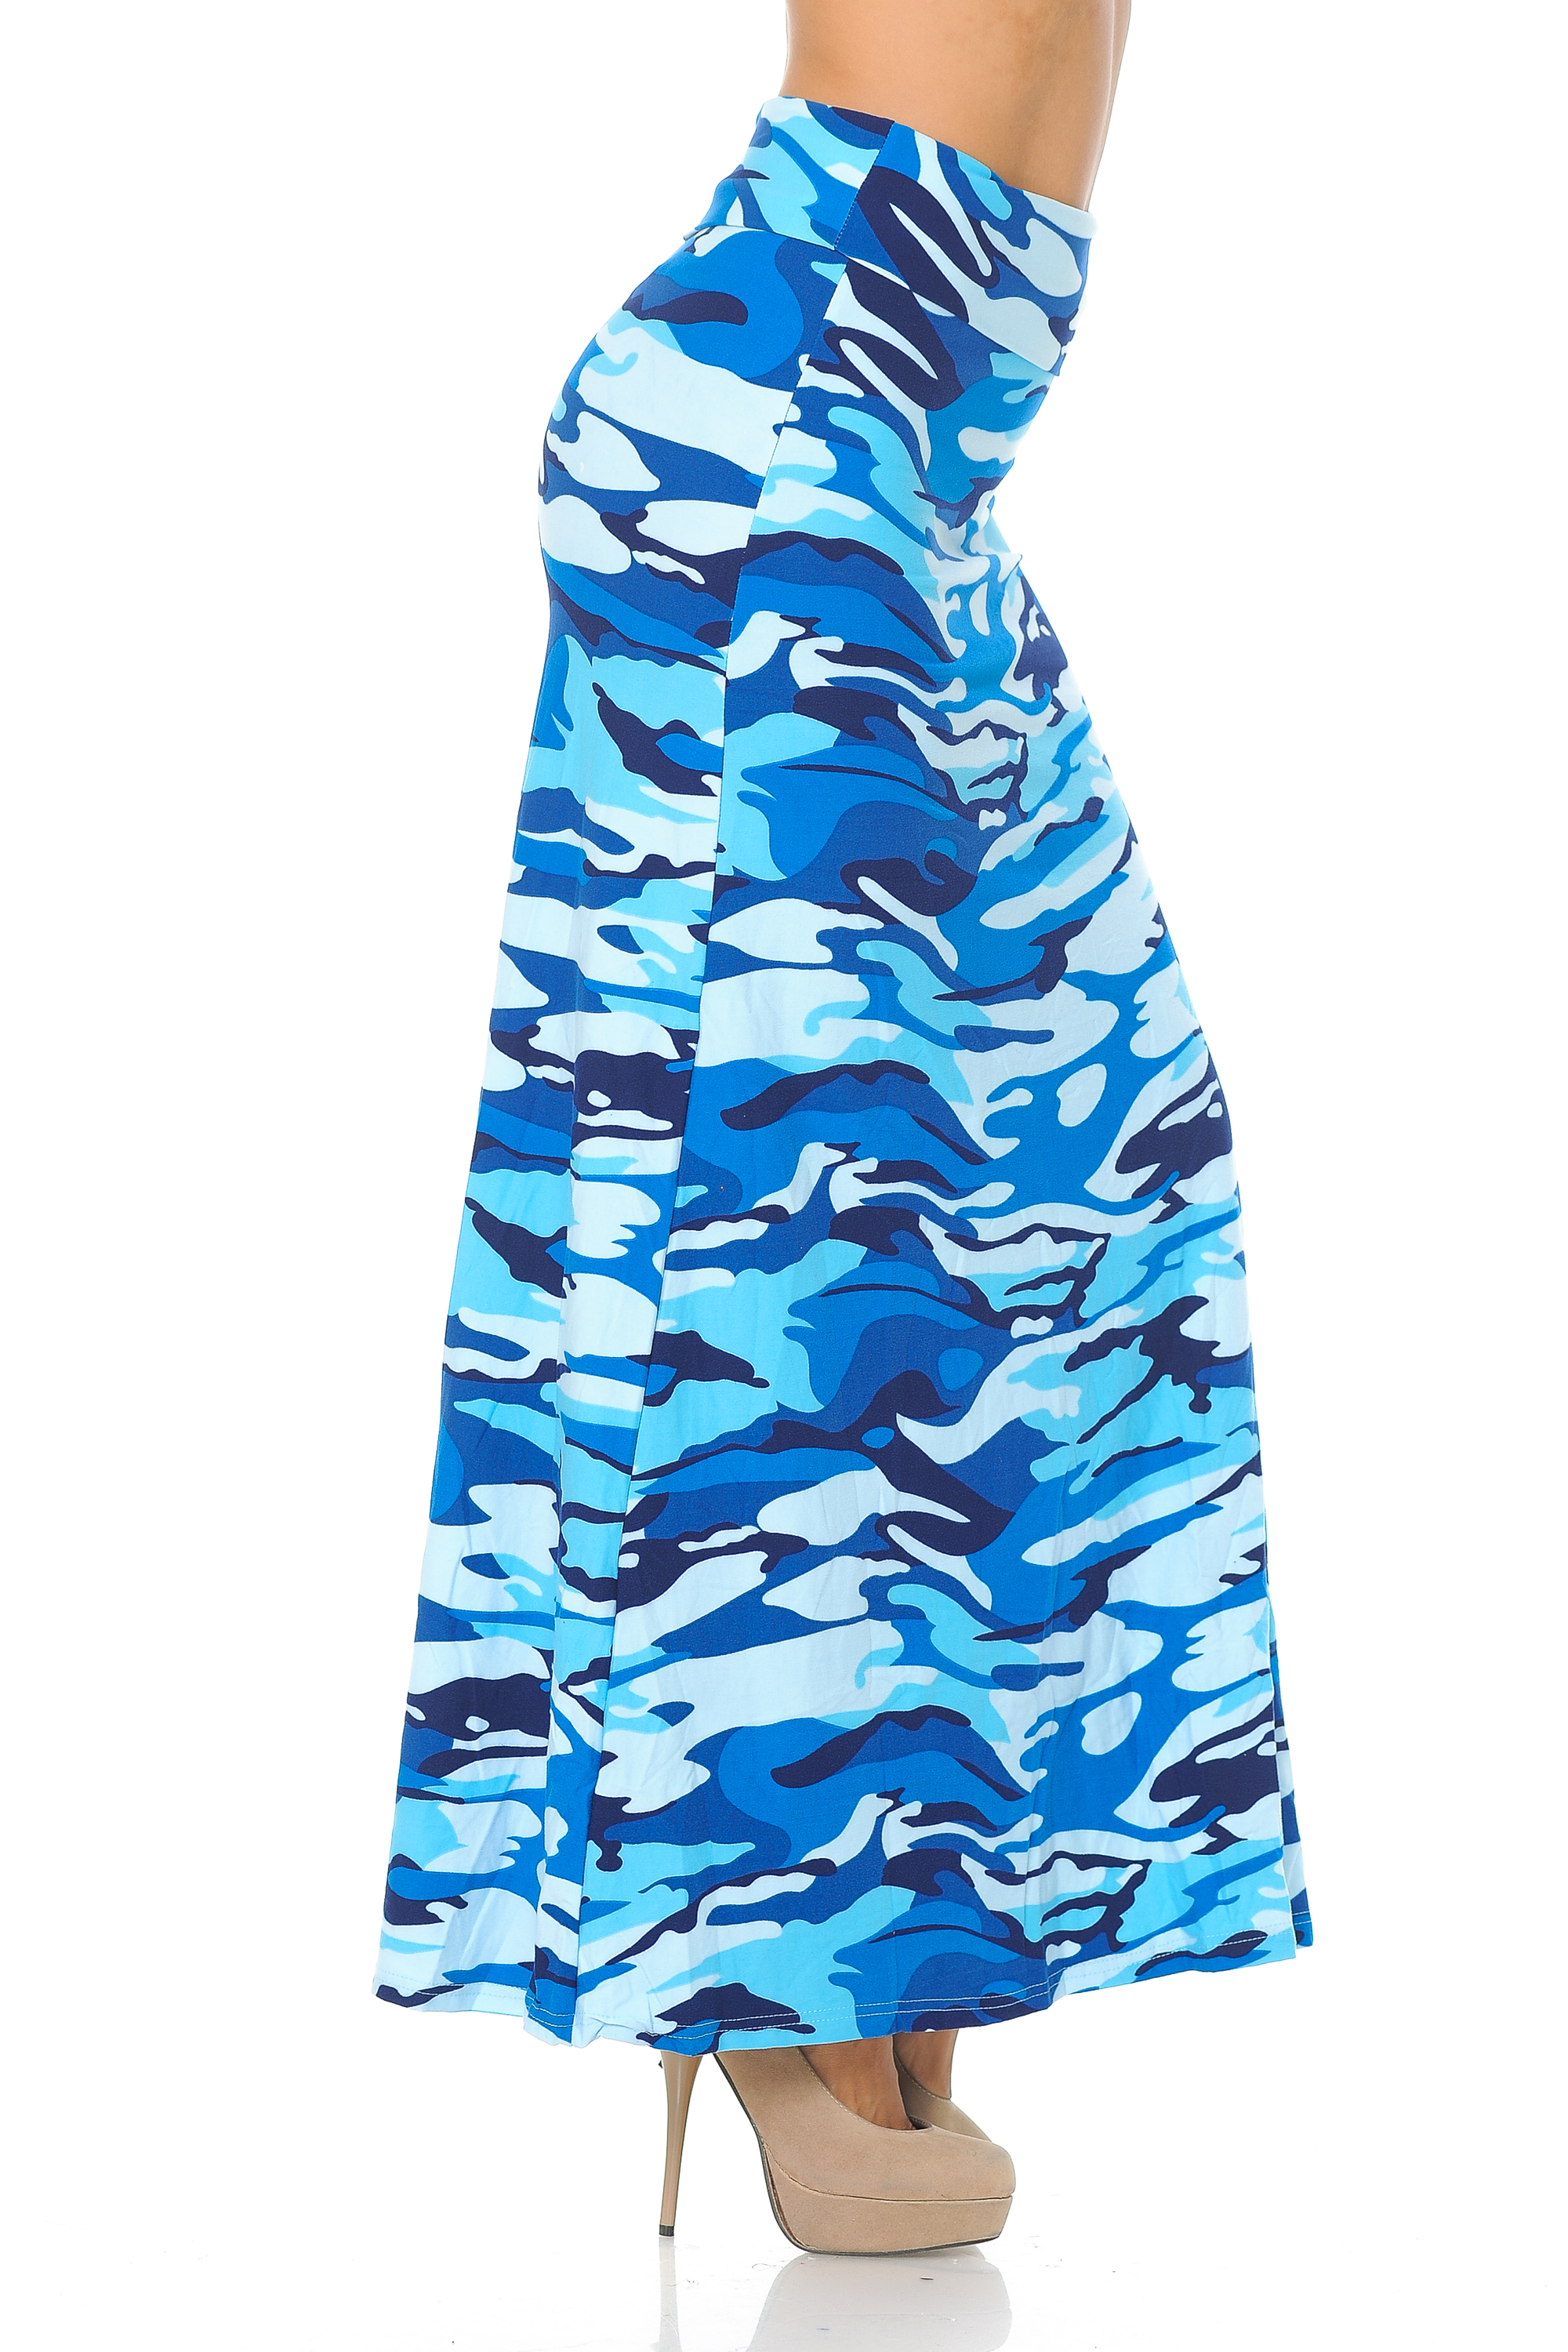 Wholesale Buttery Smooth Blue Camouflage Plus Size Maxi Skirt